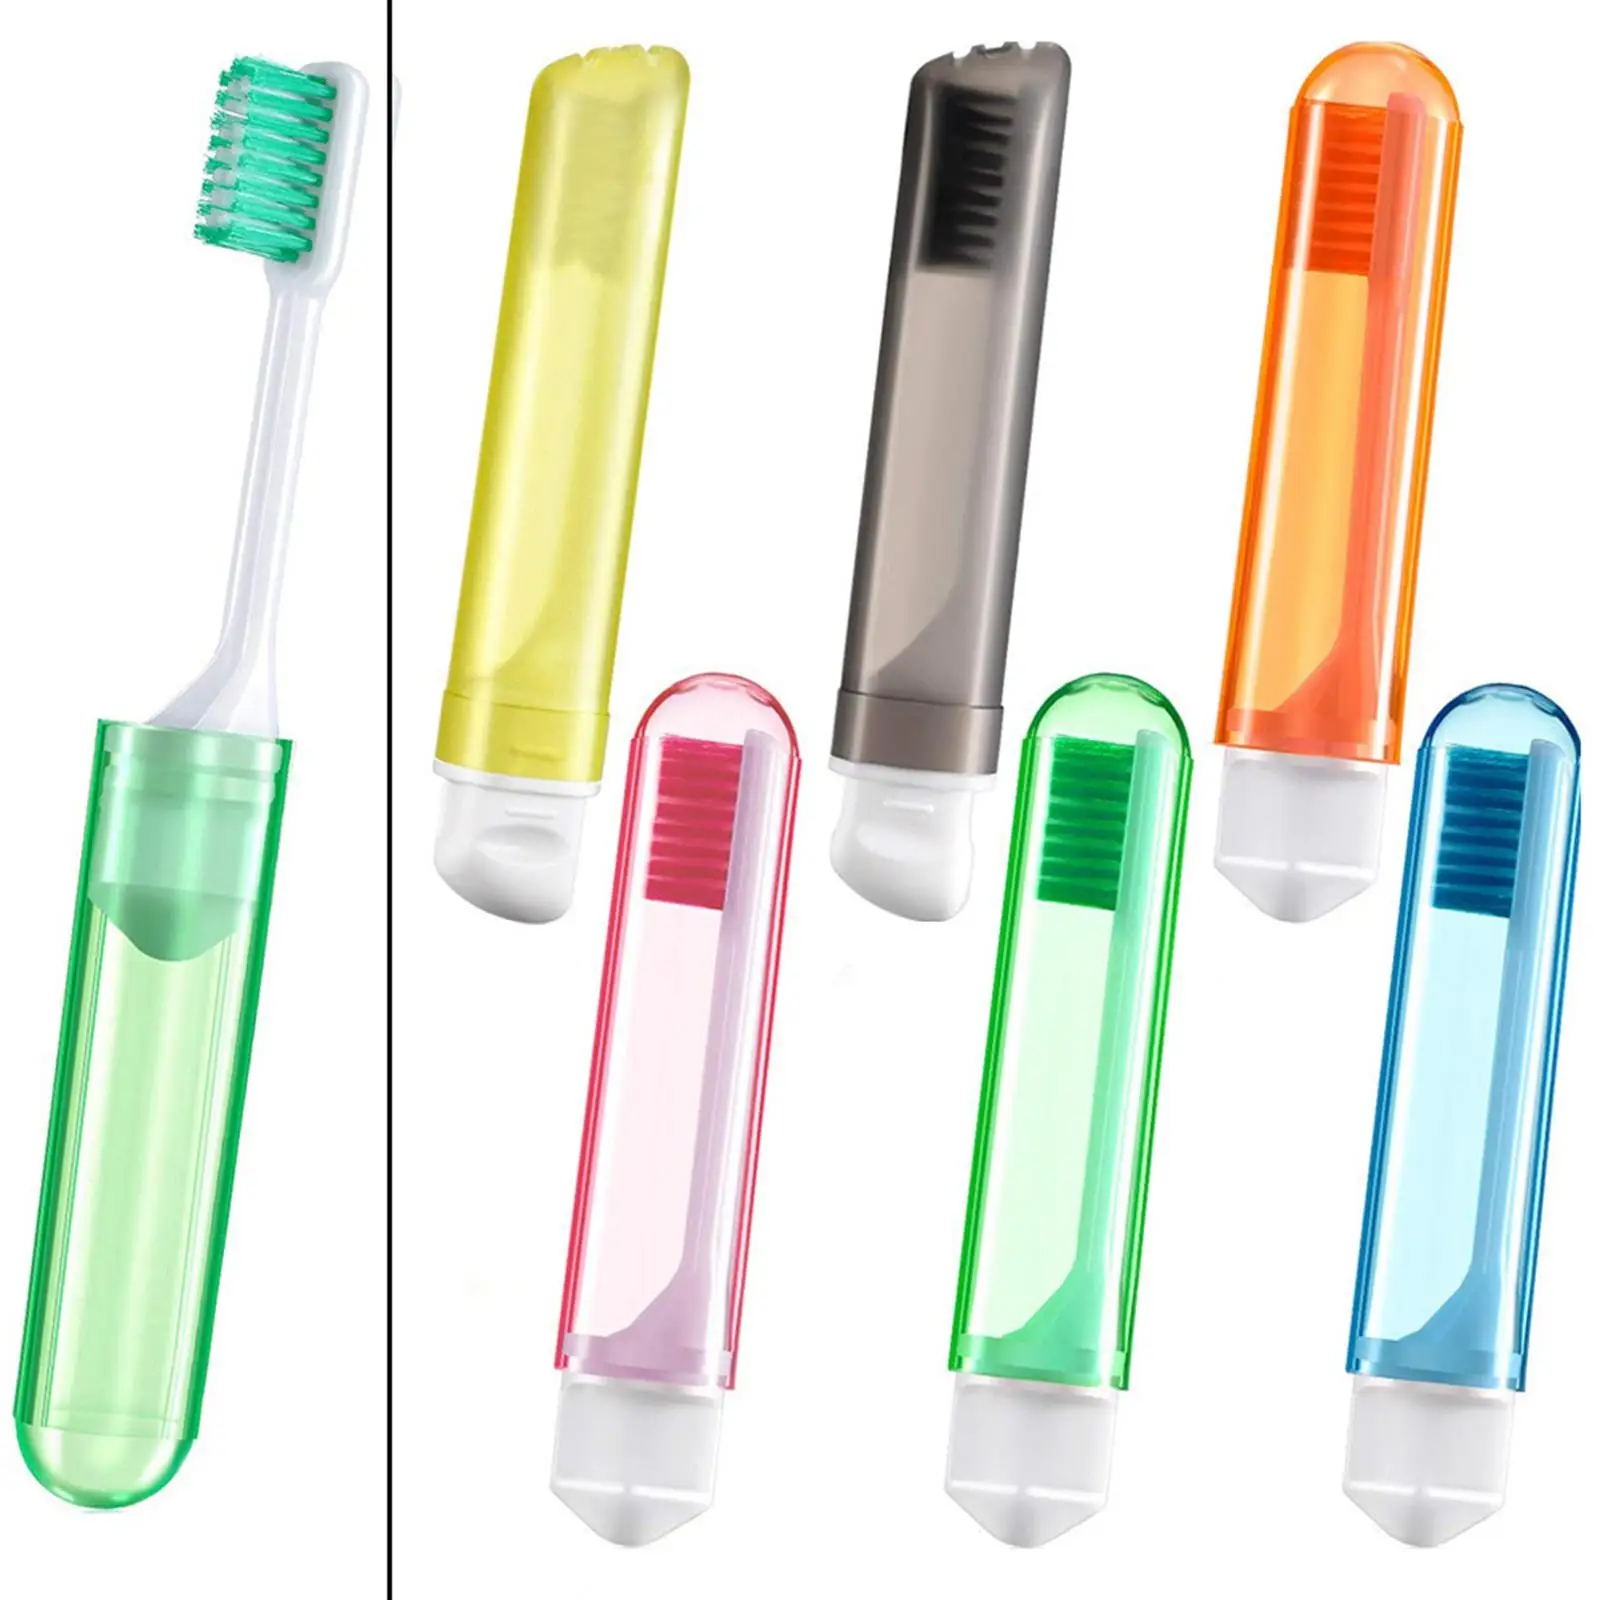 Portable Folding Toothbrush with Case Foldable for Travel Camping Business